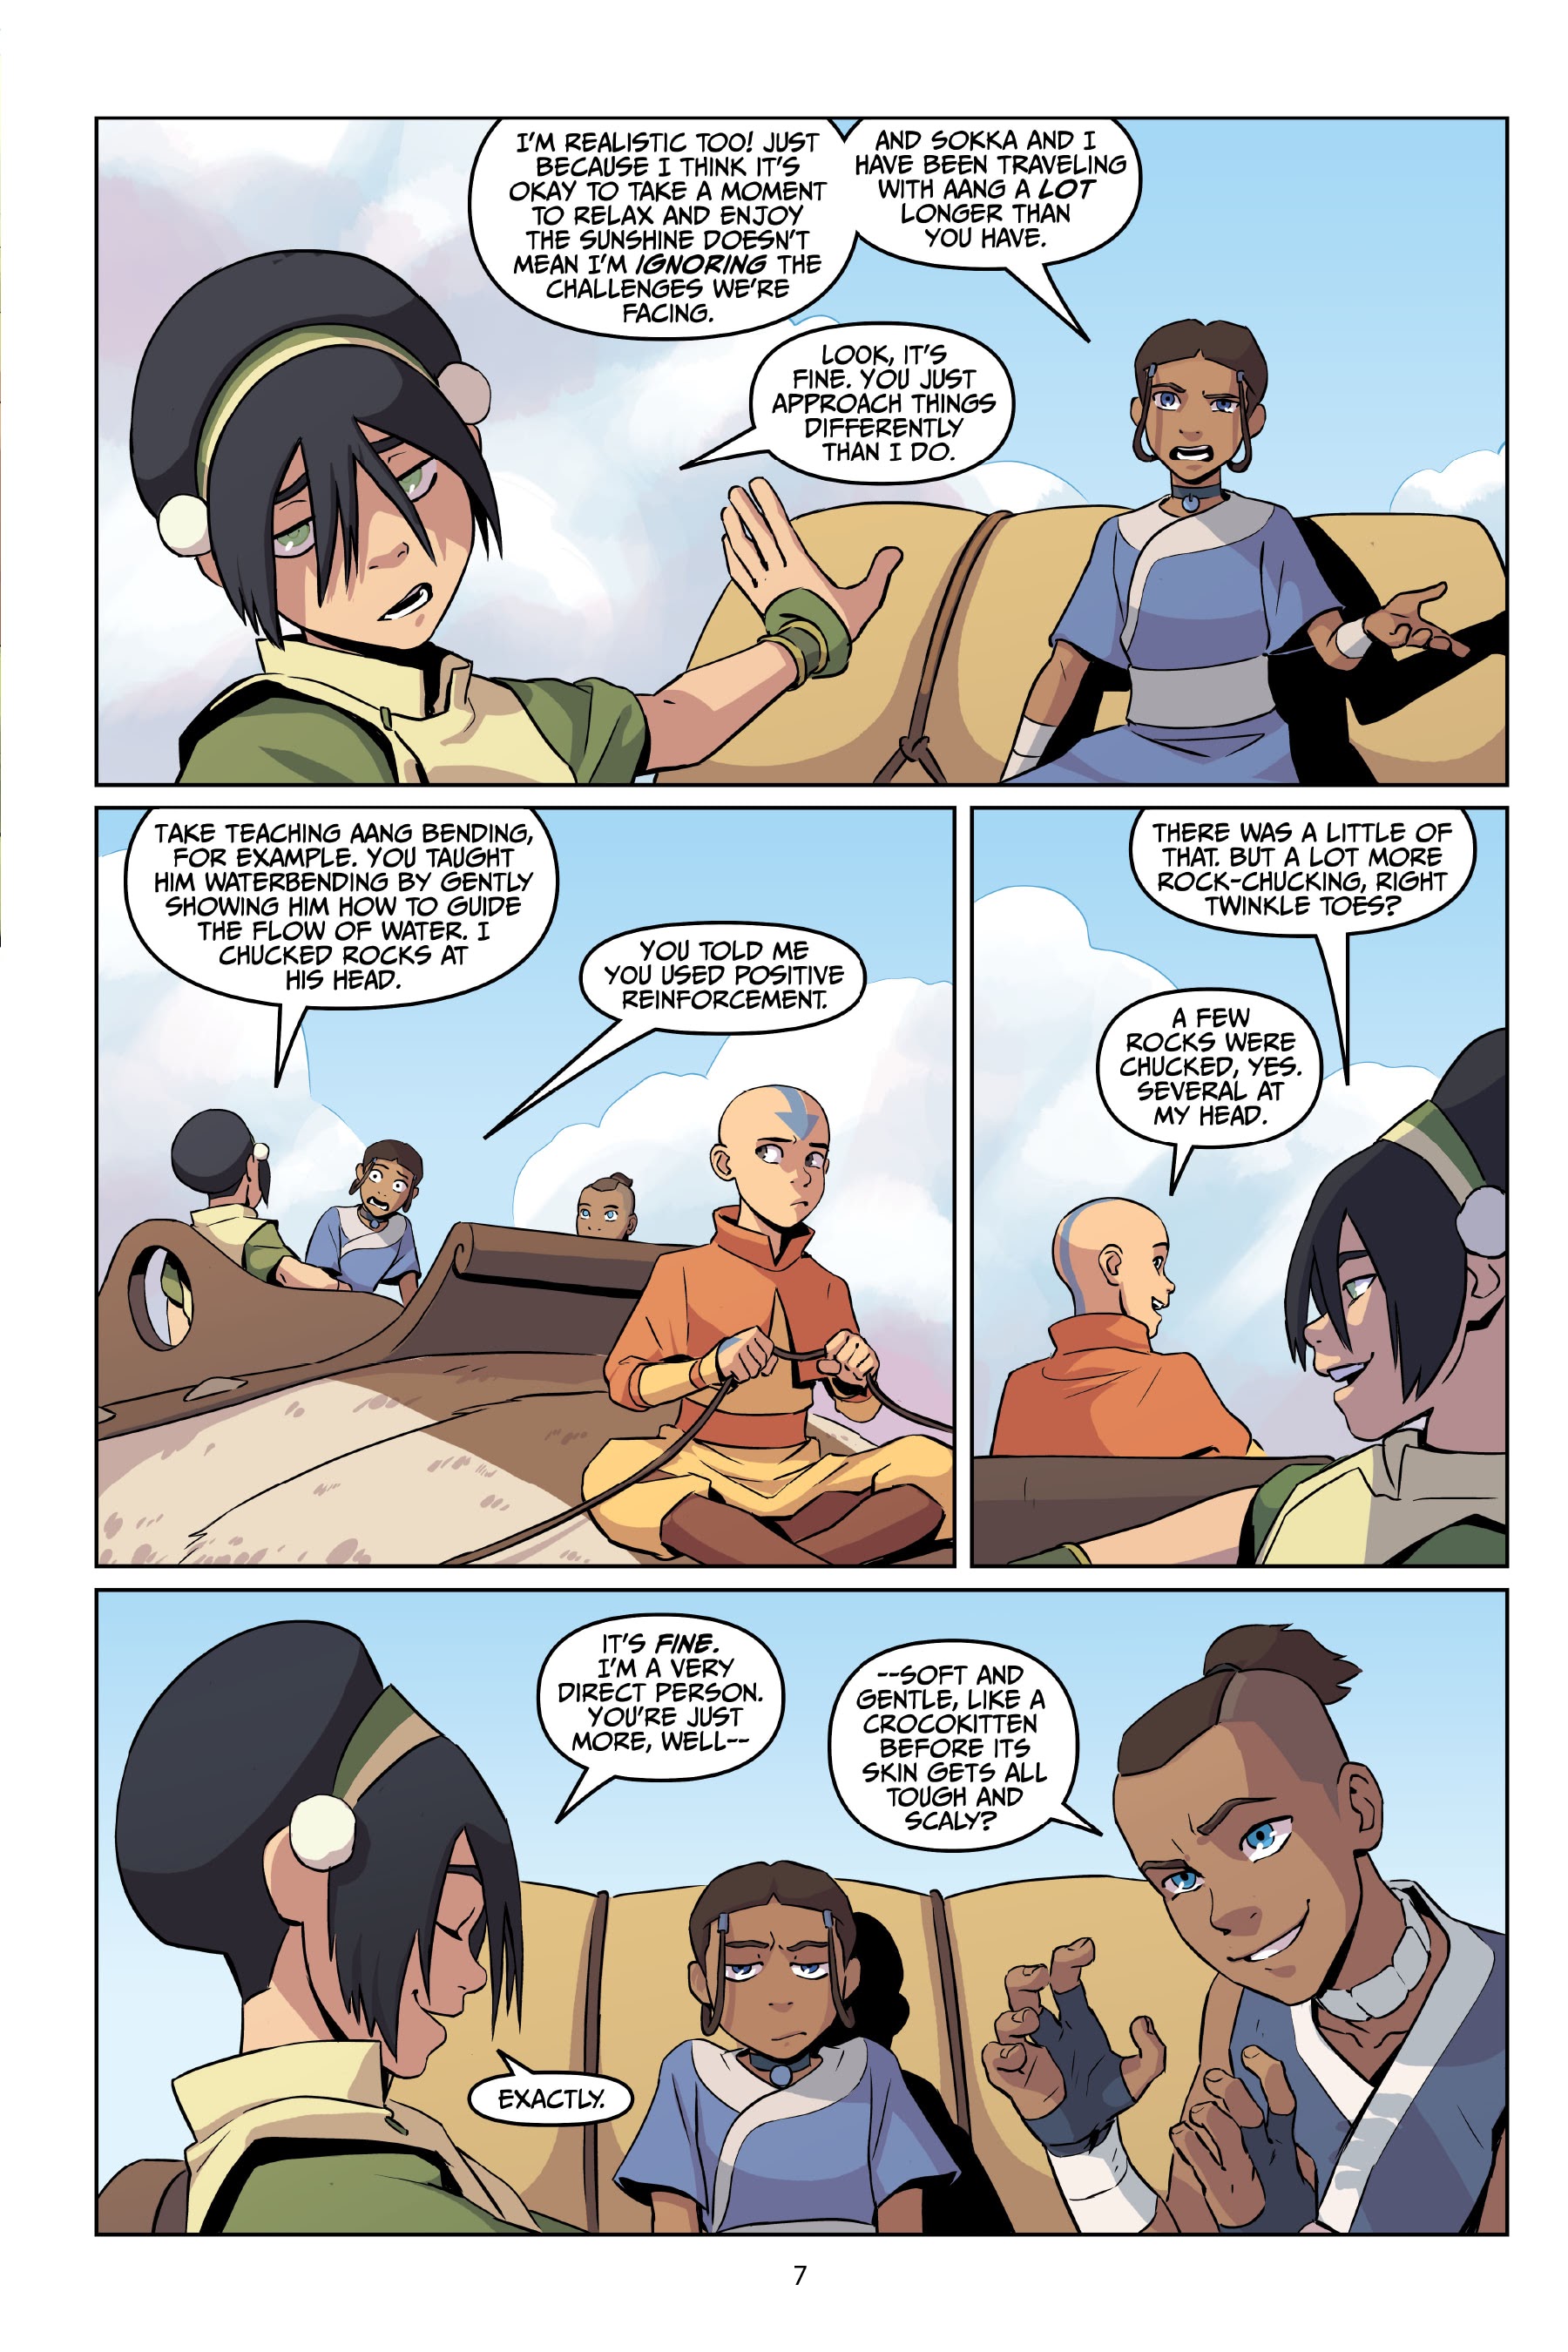 Read online Avatar: The Last Airbender—Katara and the Pirate's Silver comic -  Issue # TPB - 8